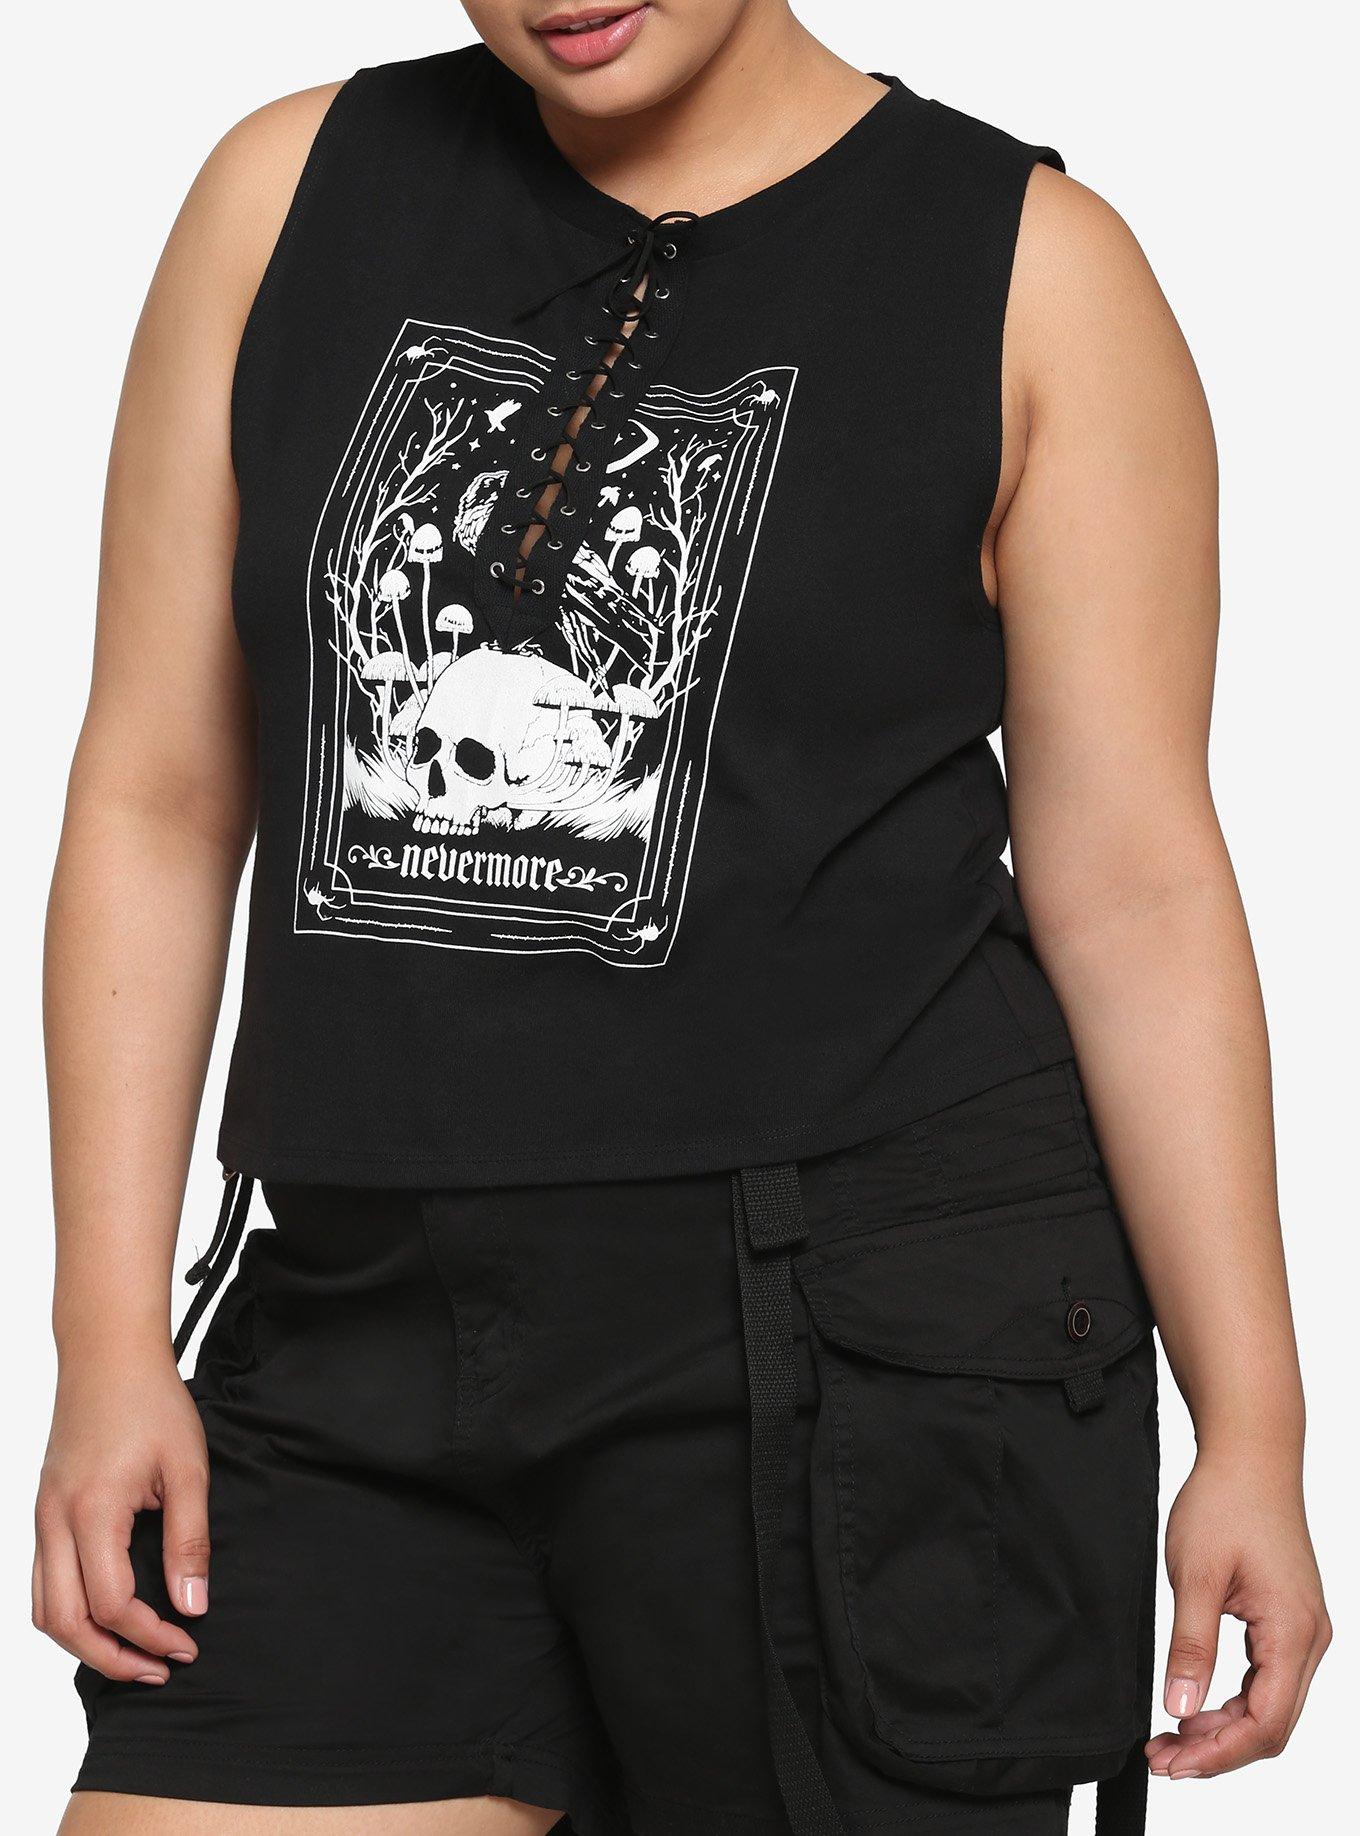 Tarot Card Nevermore Lace-Up Girls Muscle Tank Top Plus Size, BLACK, hi-res